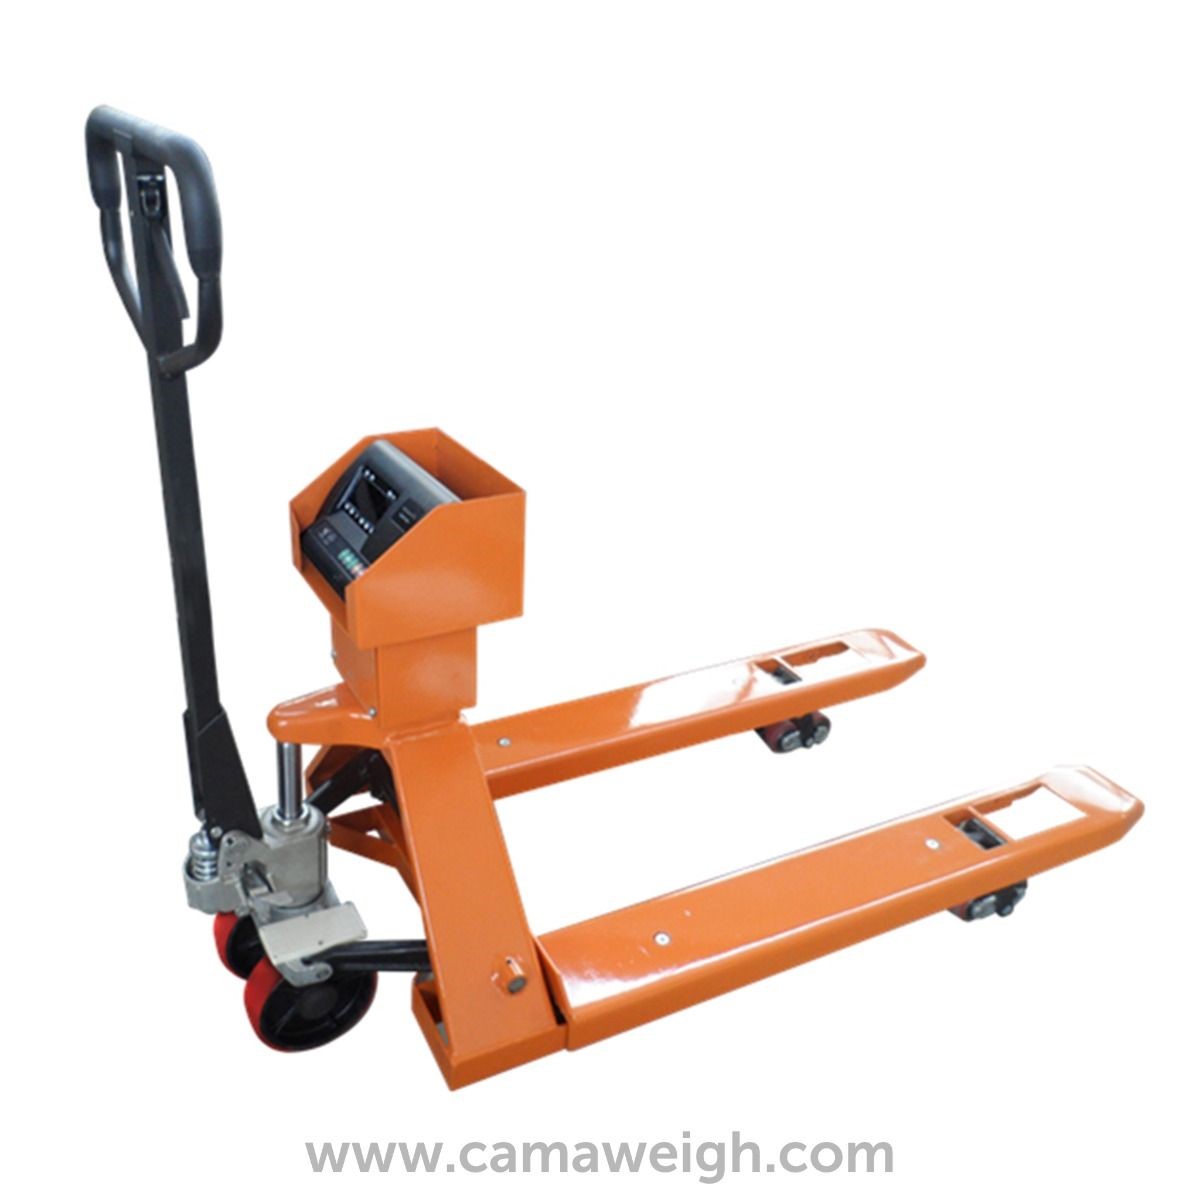 Mild Steel Pallet Truck Scale in orange for sale at Camaweigh